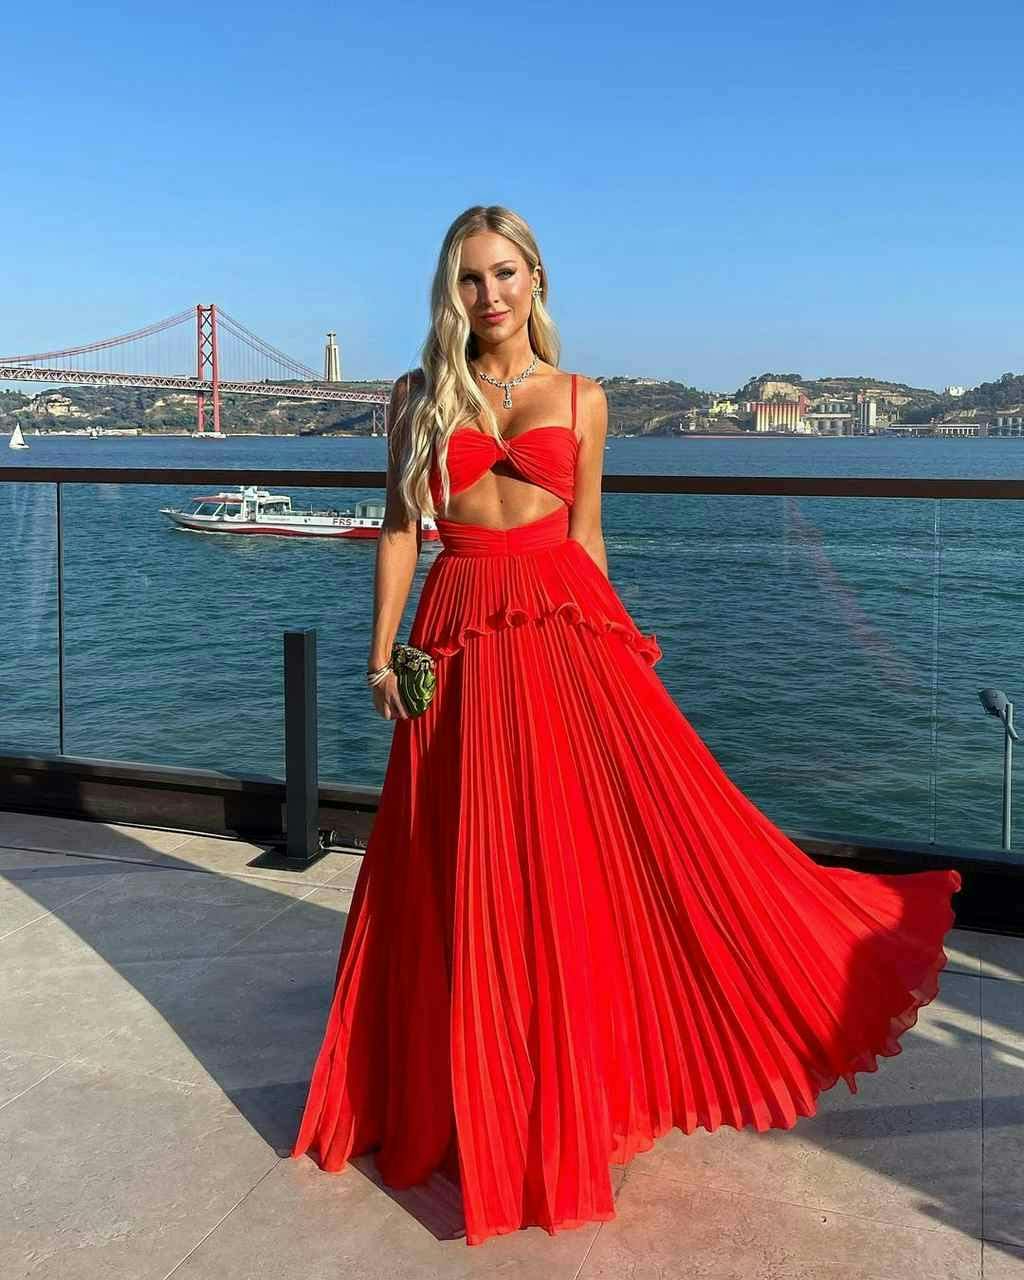 clothing apparel evening dress gown fashion robe female person human woman